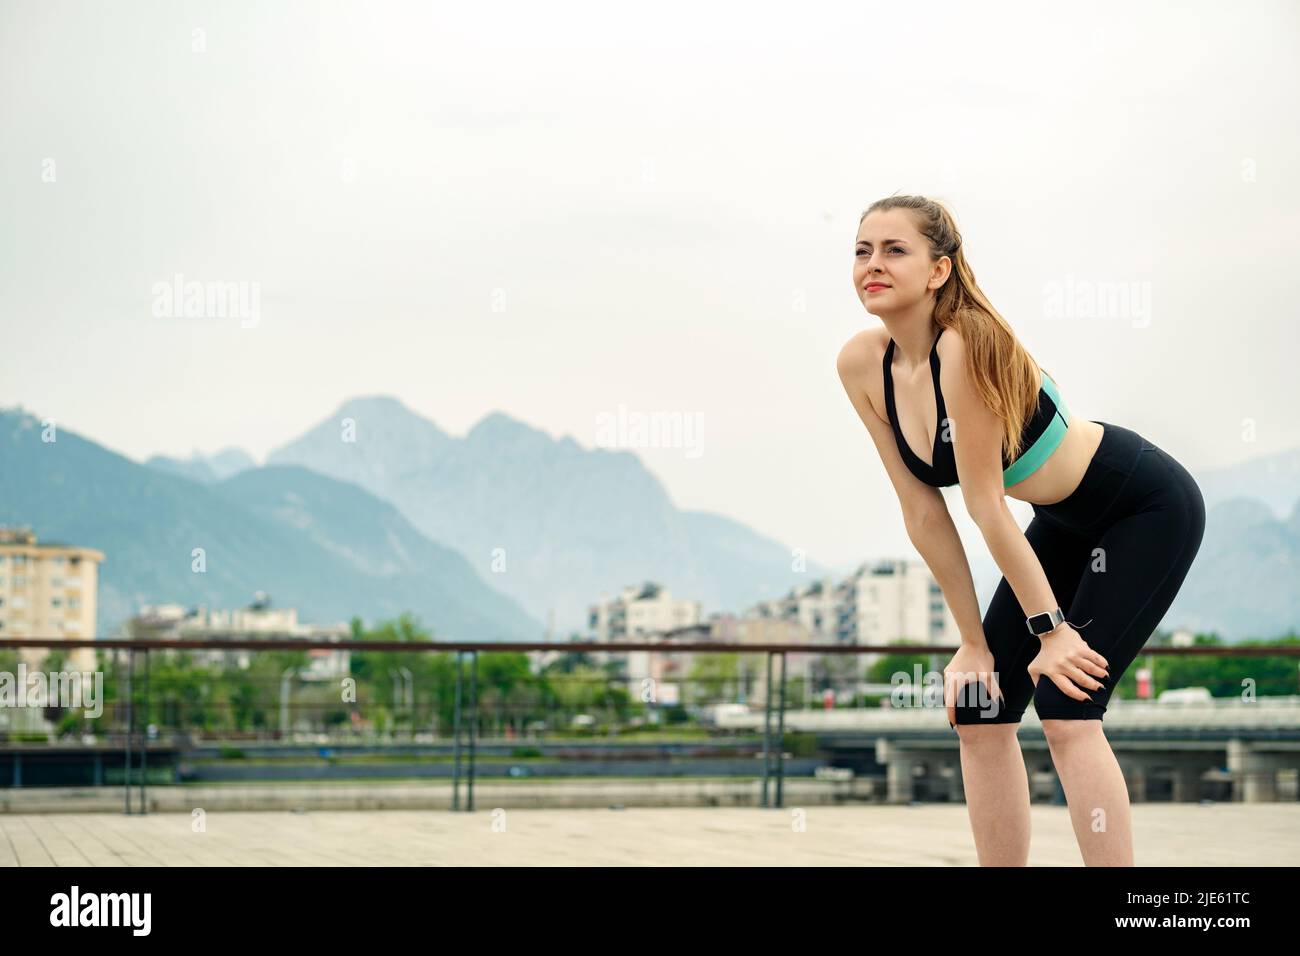 Young beautiful woman wearing sportive clothes on city park, outdoors standing bent over and catching her breath after a running session. Outdoor spor Stock Photo